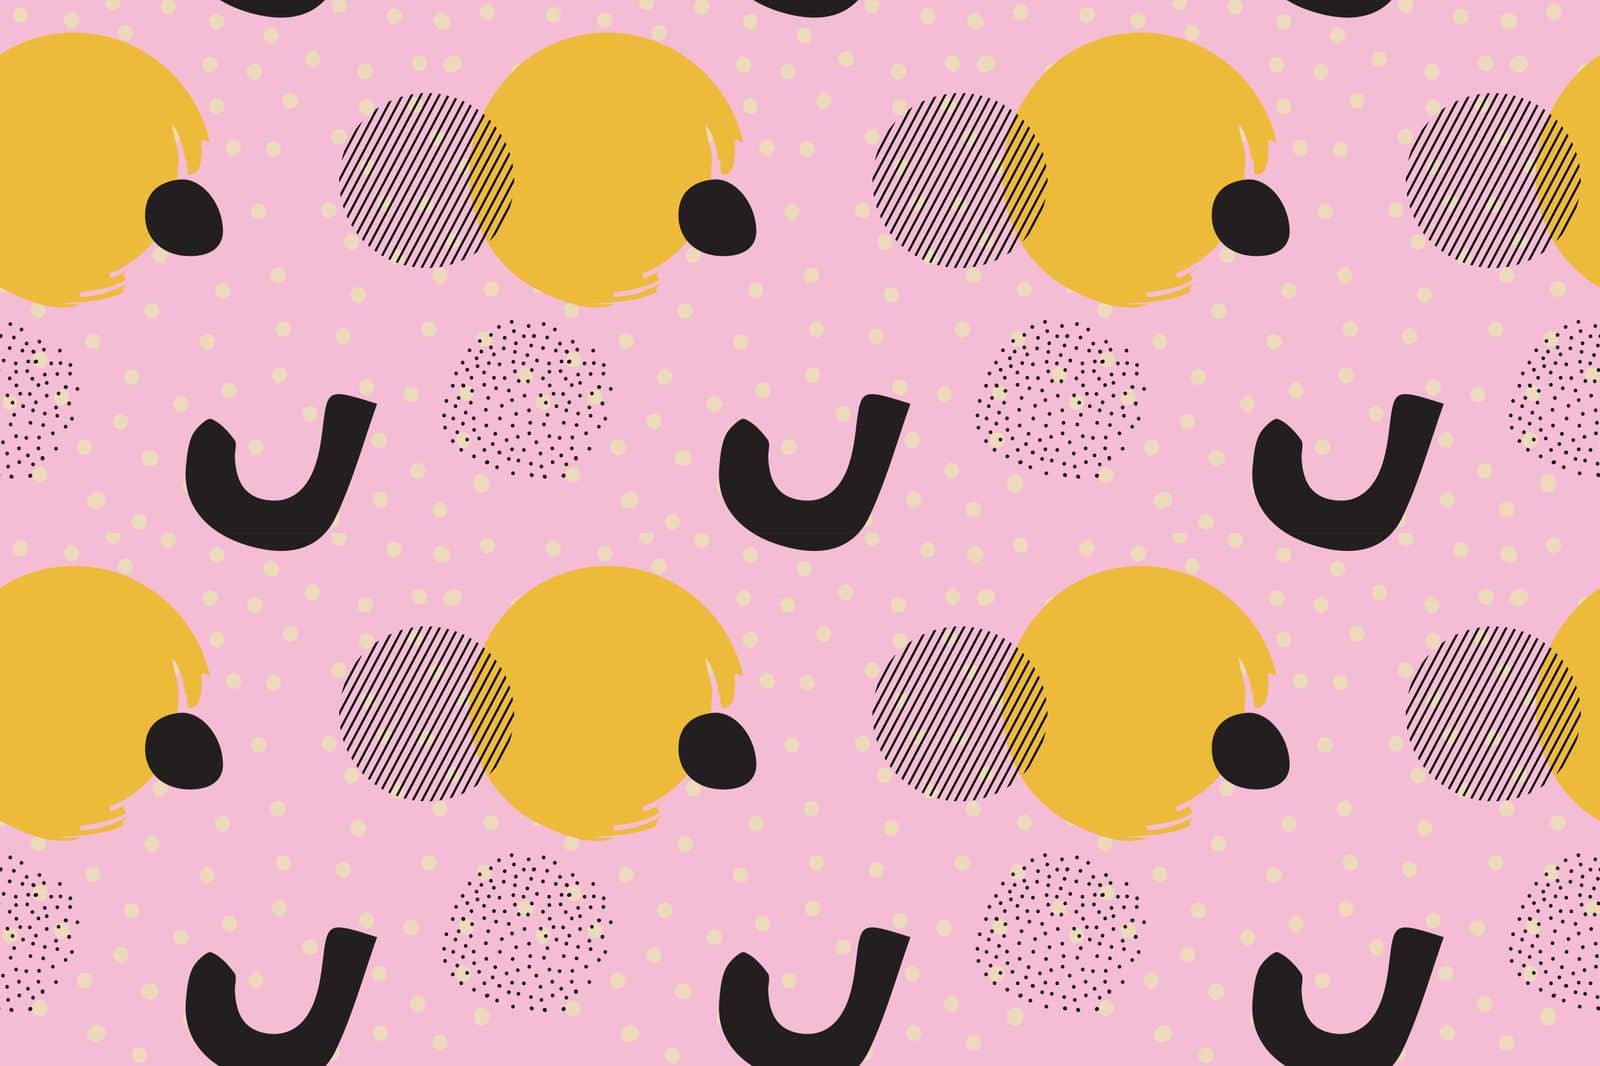 Memphis Pattern. Summer Fun Background. Pink, Yellow Colors. Memphis Style Patterns. Abstract Colorful Fun Background. Hipster Style 80s-90s. Fun pattern. Vector illustration